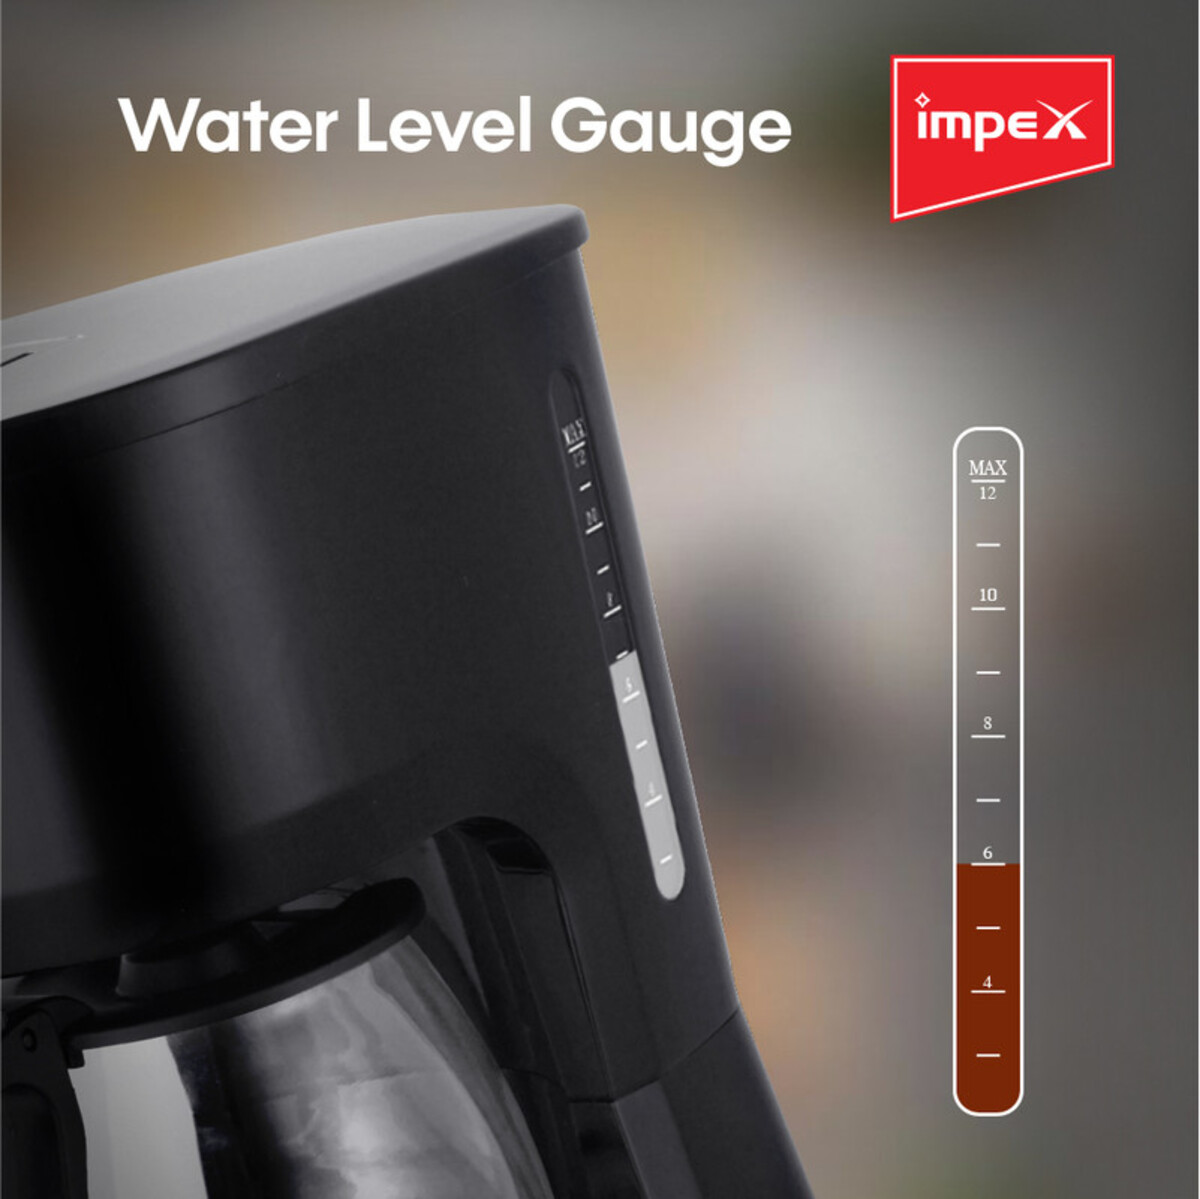 Impex Cm 1915 1000 Watts Drip Coffee Maker Featuring Anti-drip Function